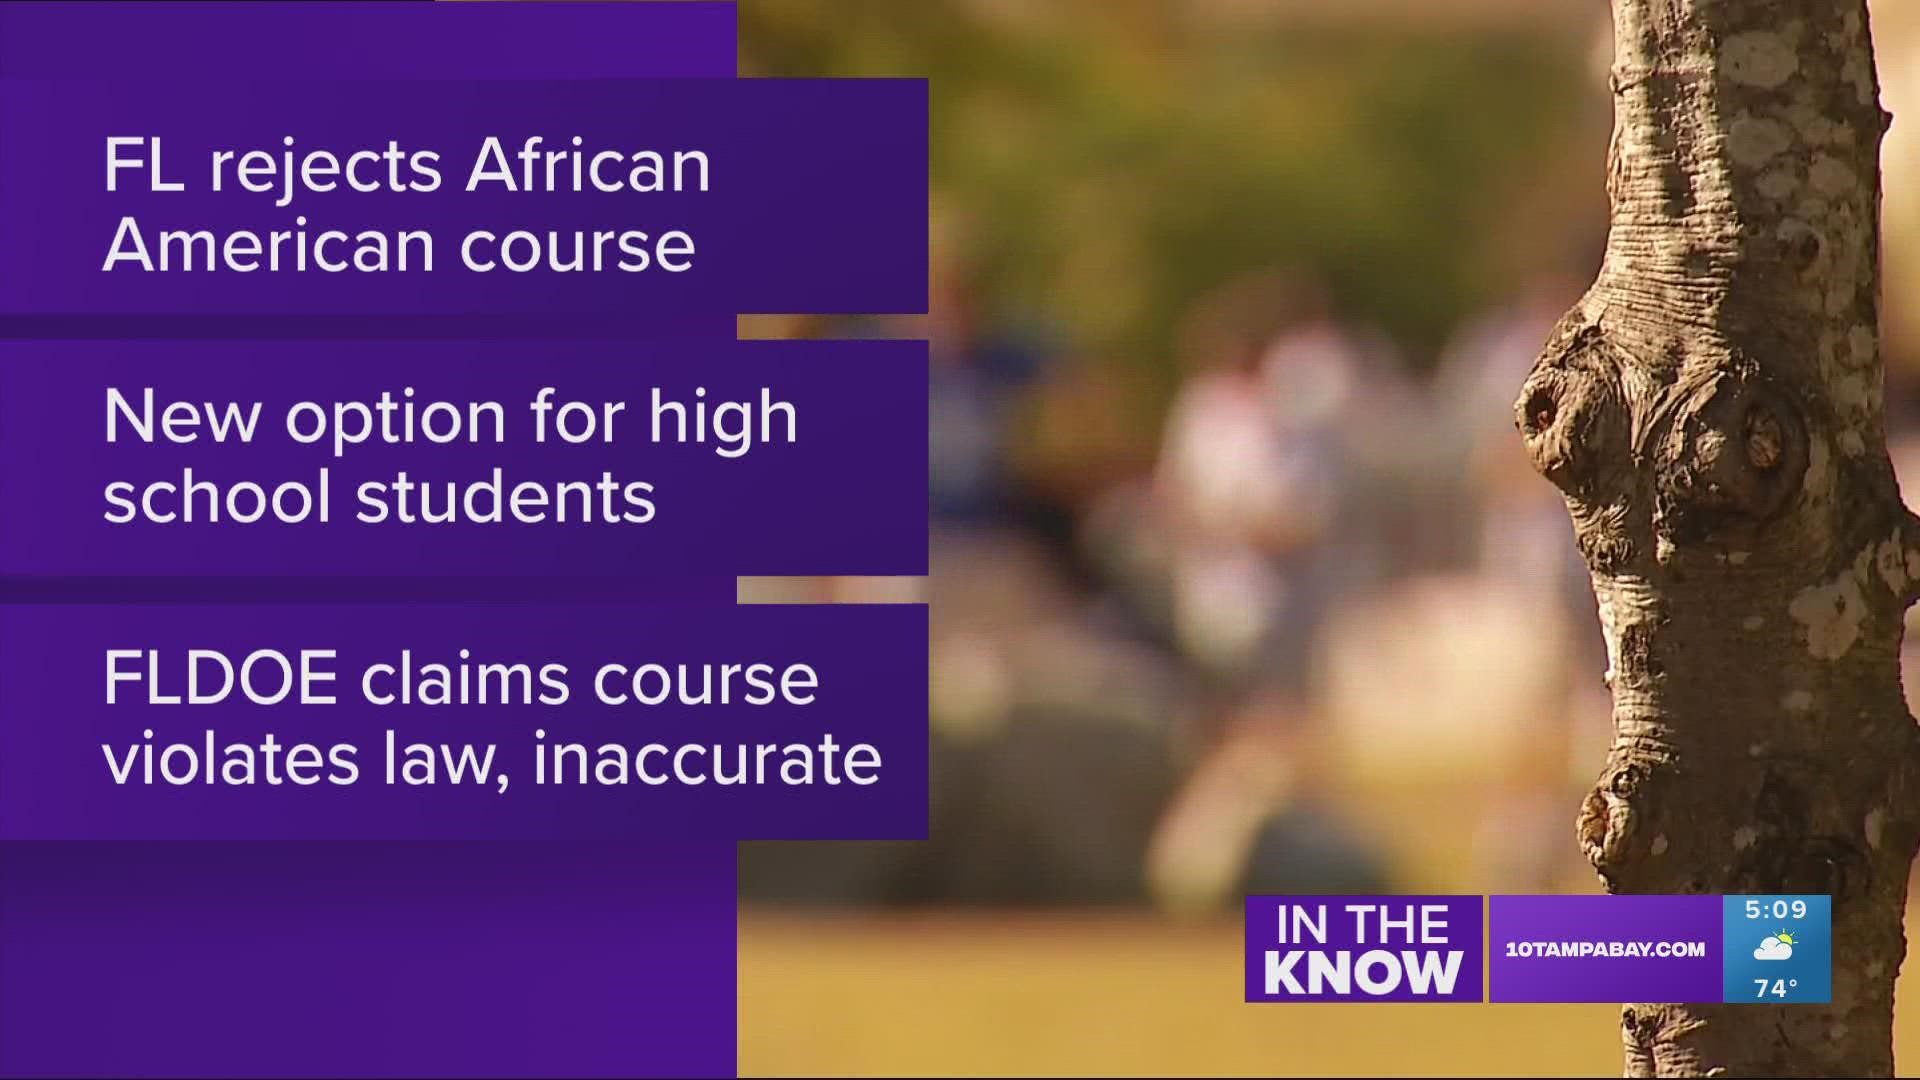 10 Investigates asked the Florida DOE for clarification on what is historically inaccurate about the course.